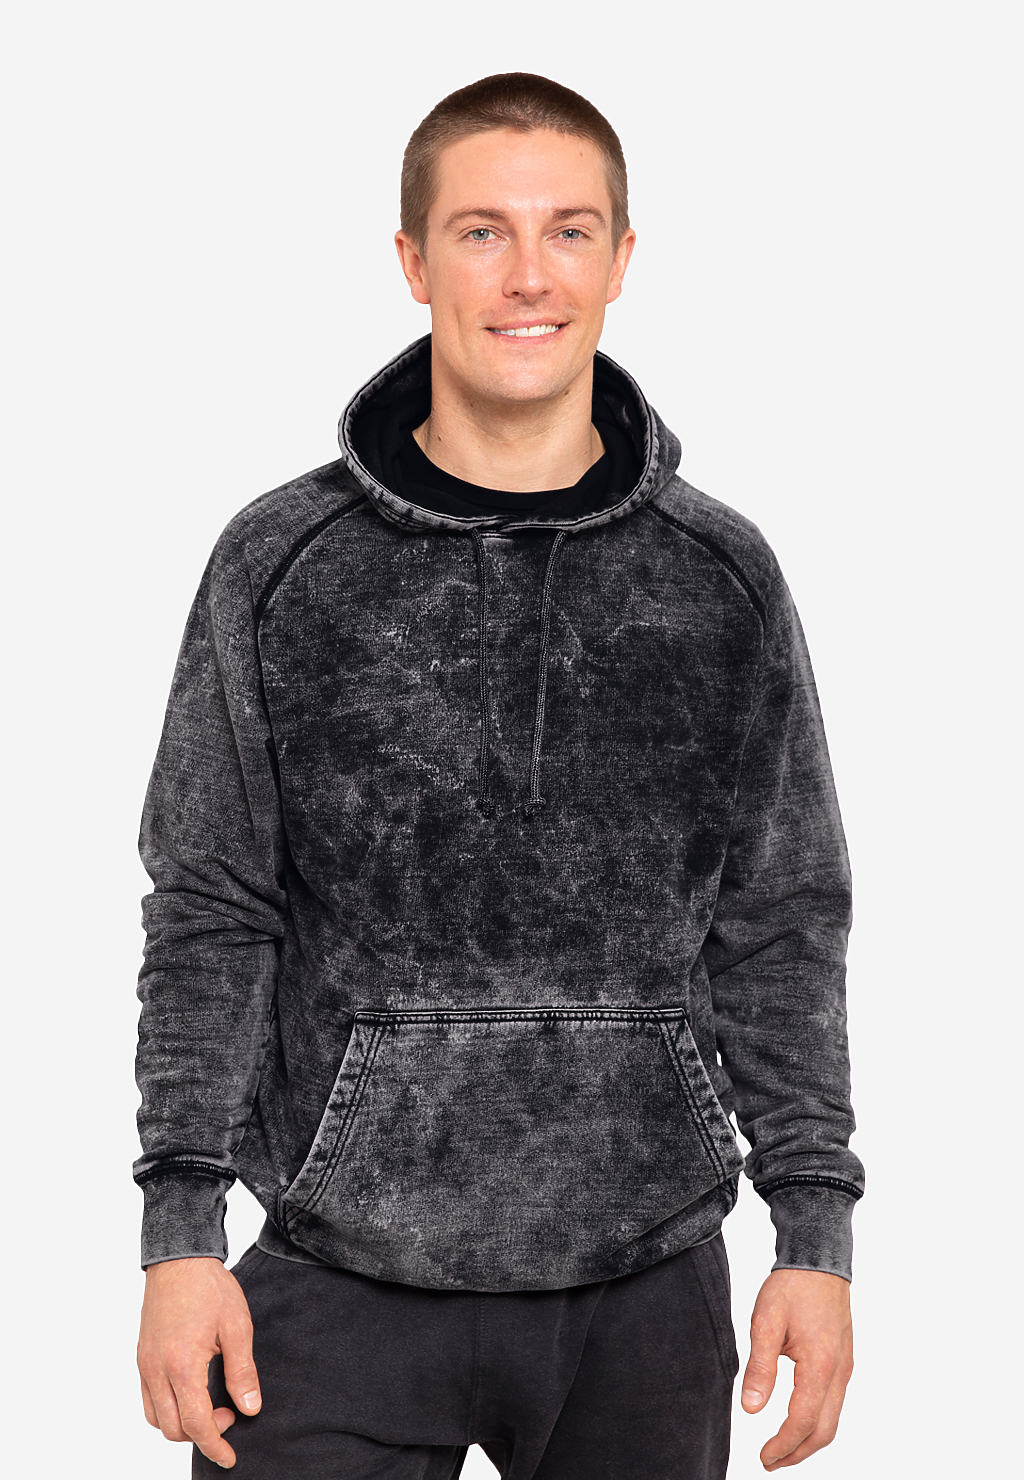 Looking for a similar washed black zip up hoodie as this for under